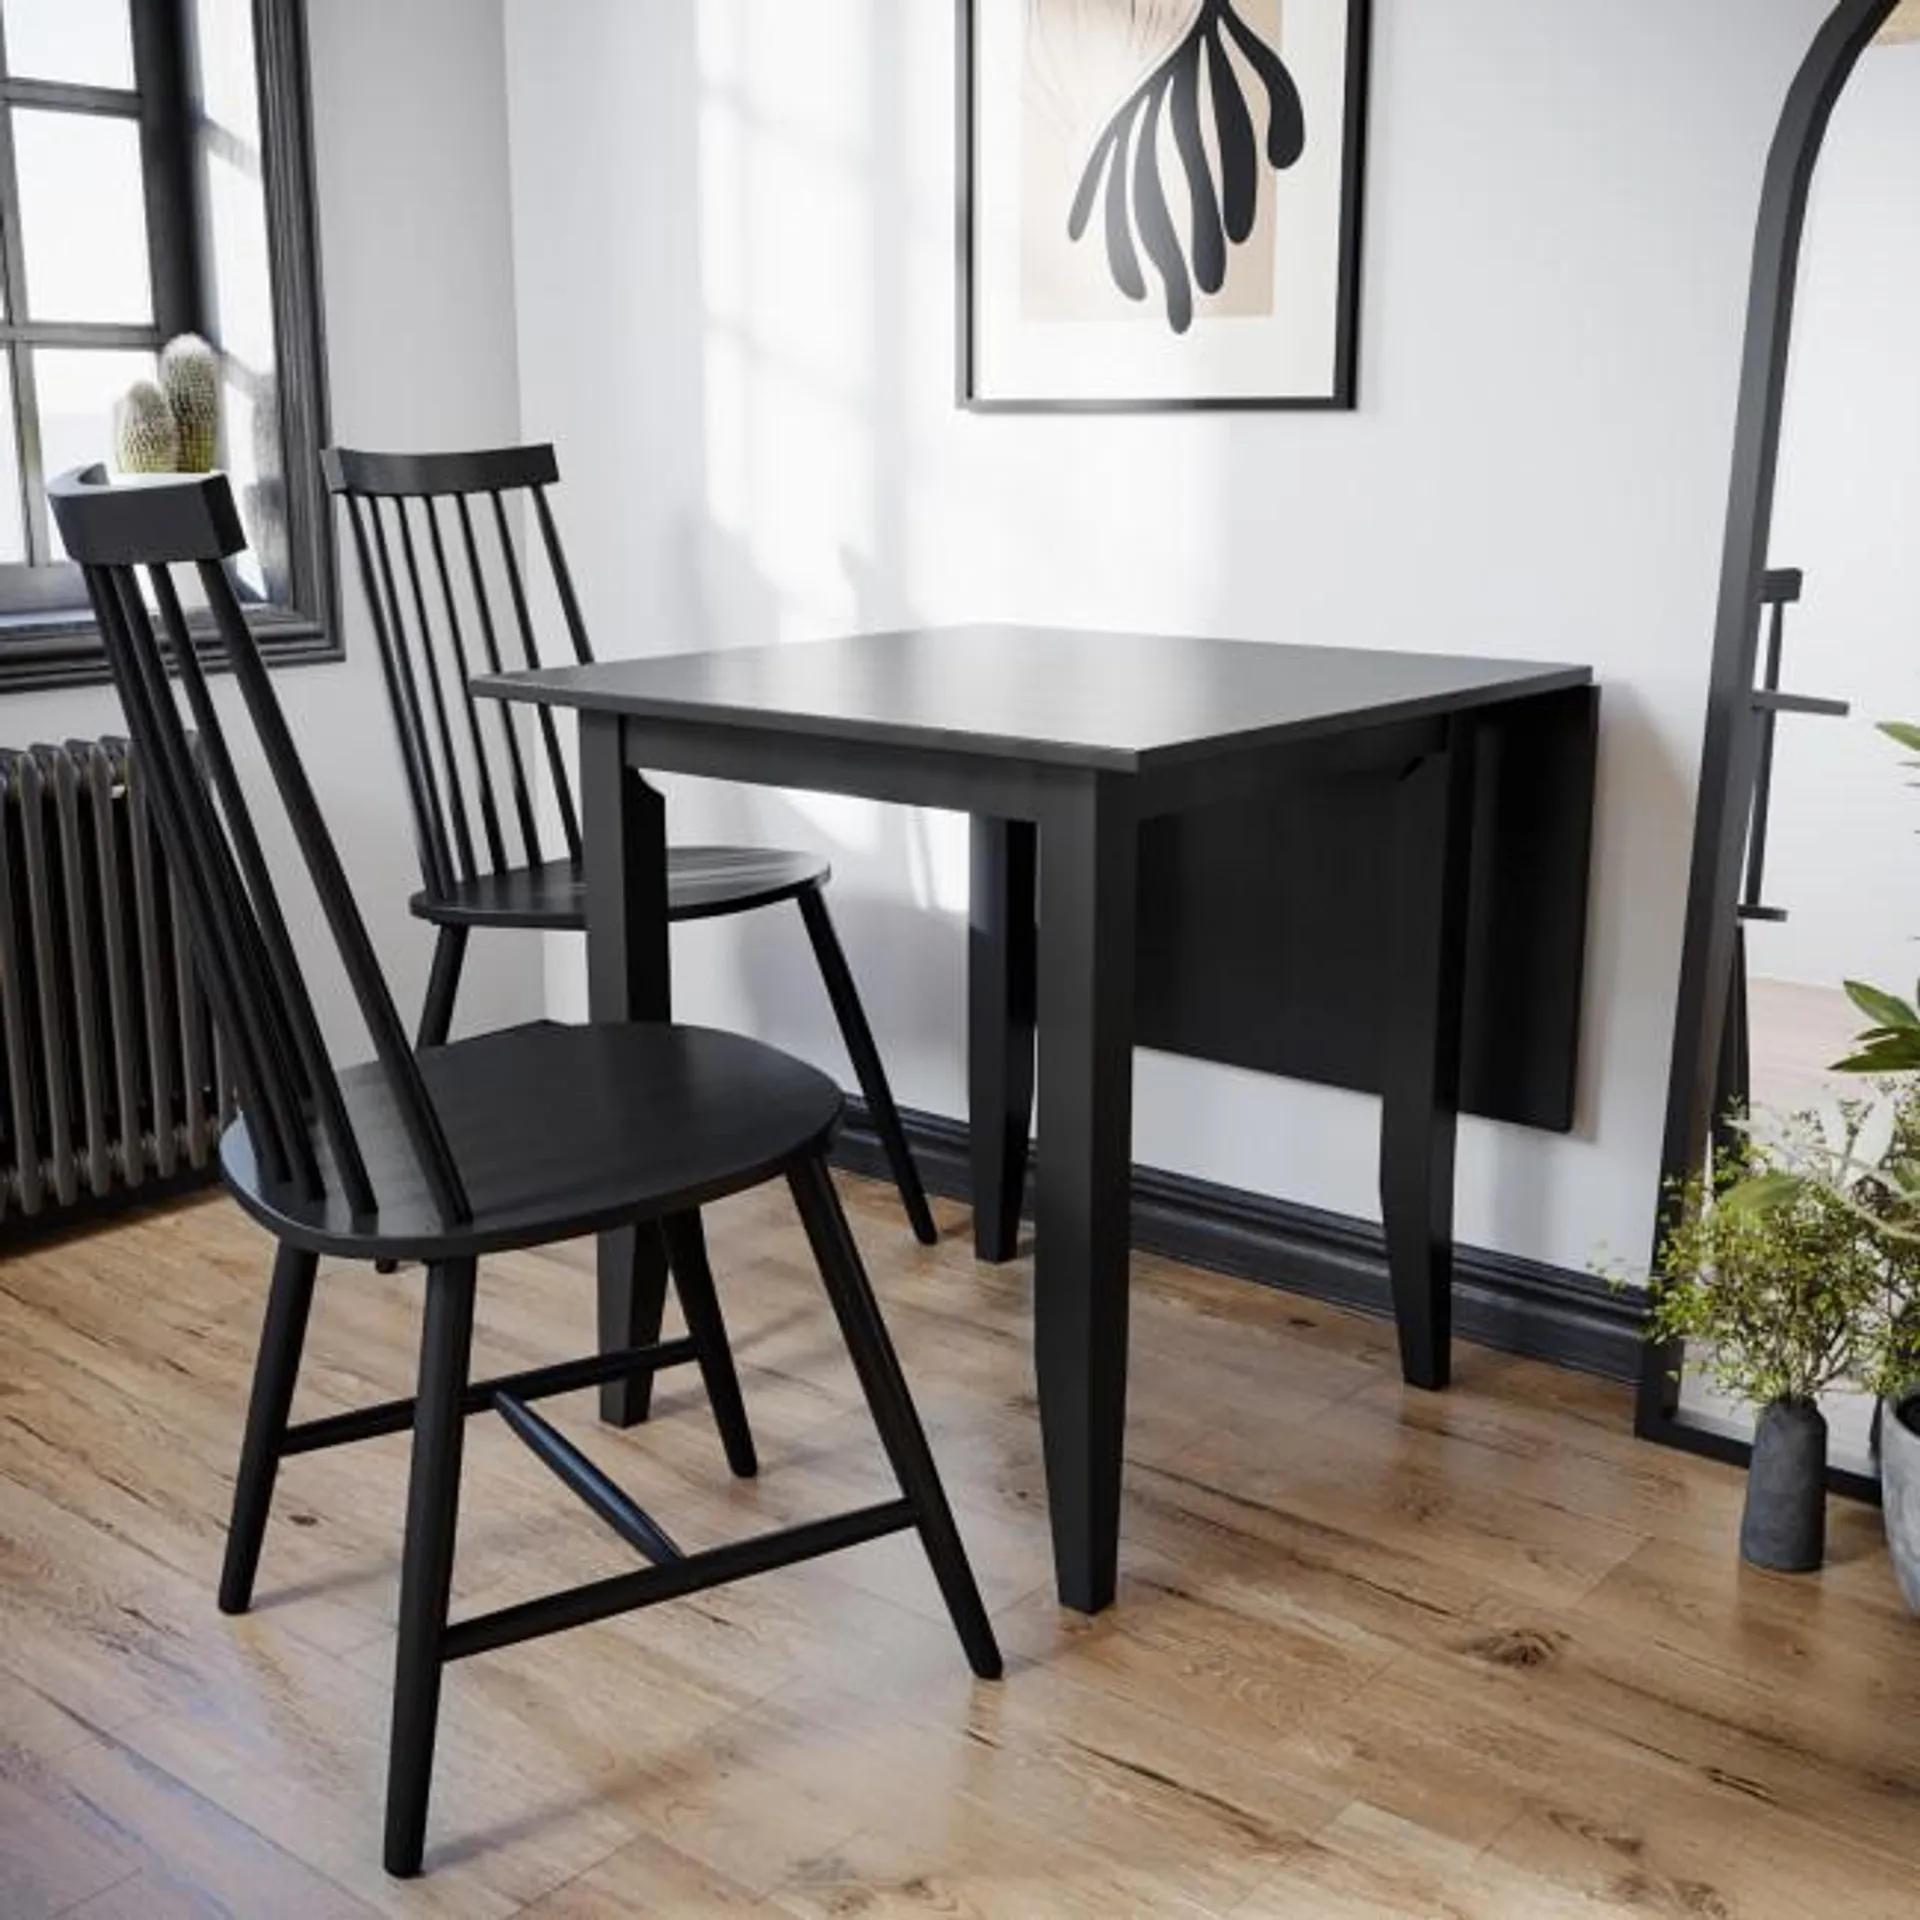 Drop Leaf Black Dining Table with 2 Black Spindle Dining Chairs - Olsen